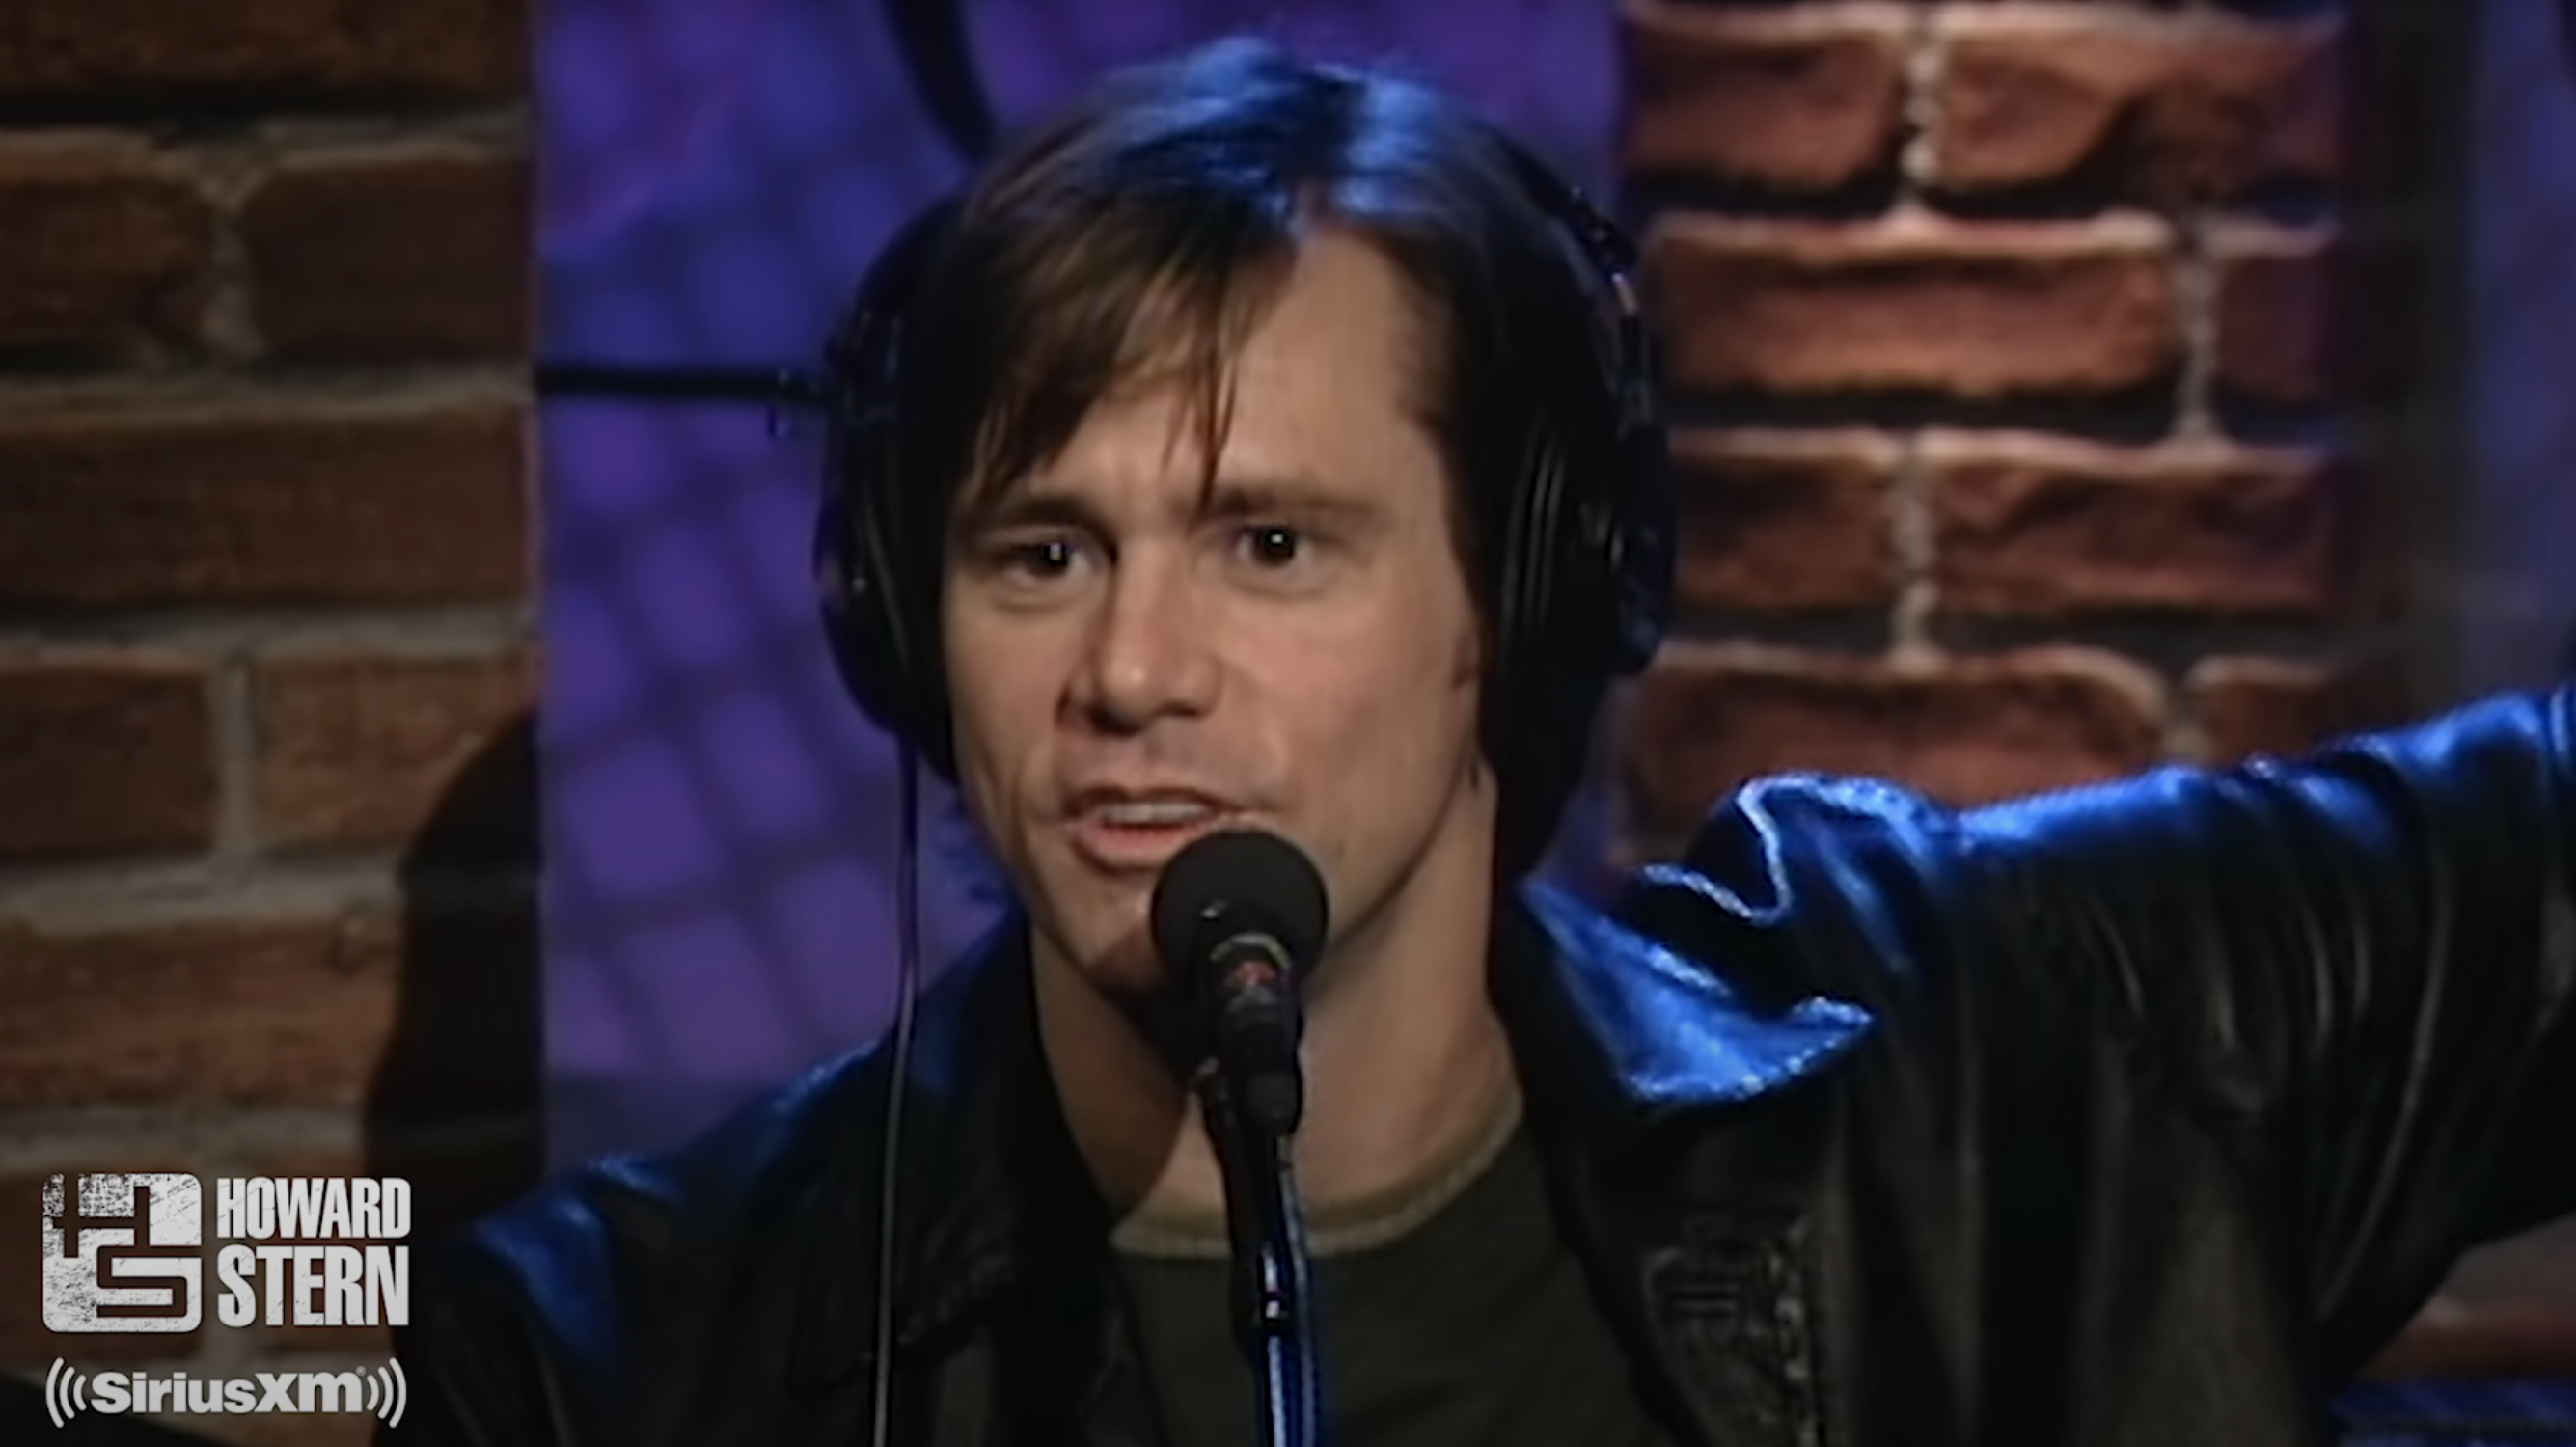 Jim Carrey on &quot;Howard Stern&quot;